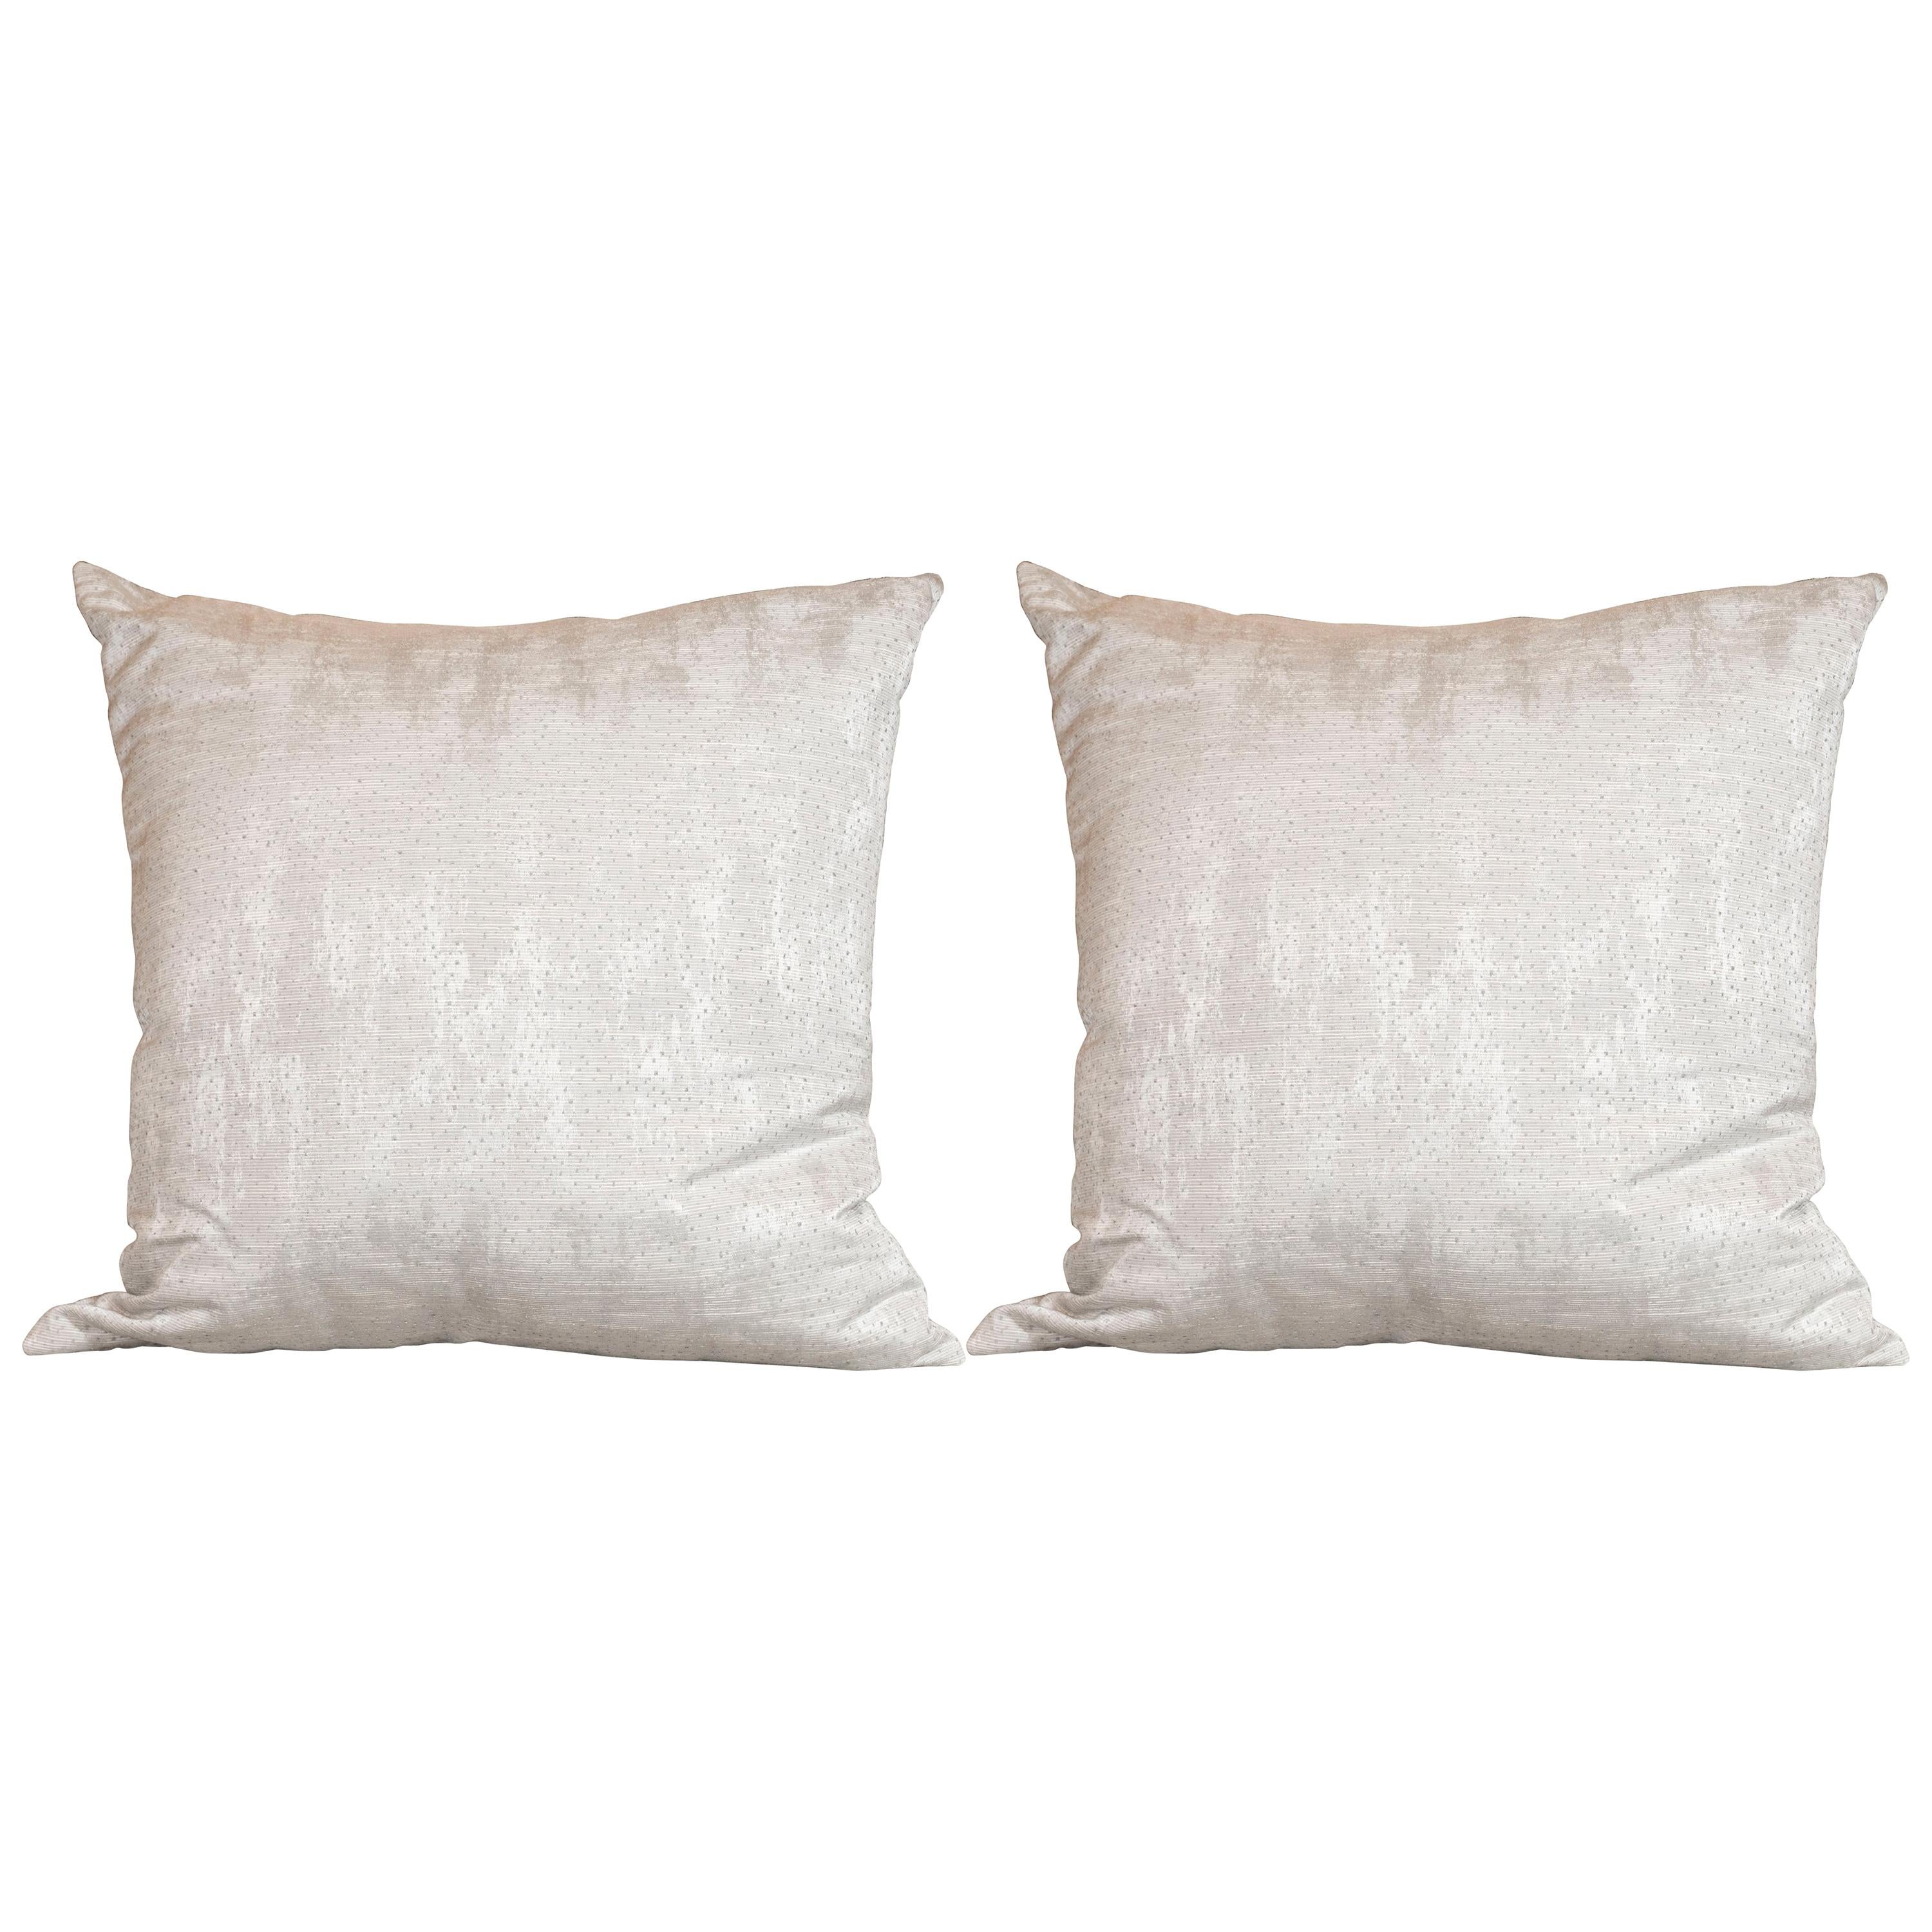 Pair of Modernist Striated and Tufted Gray Pillows